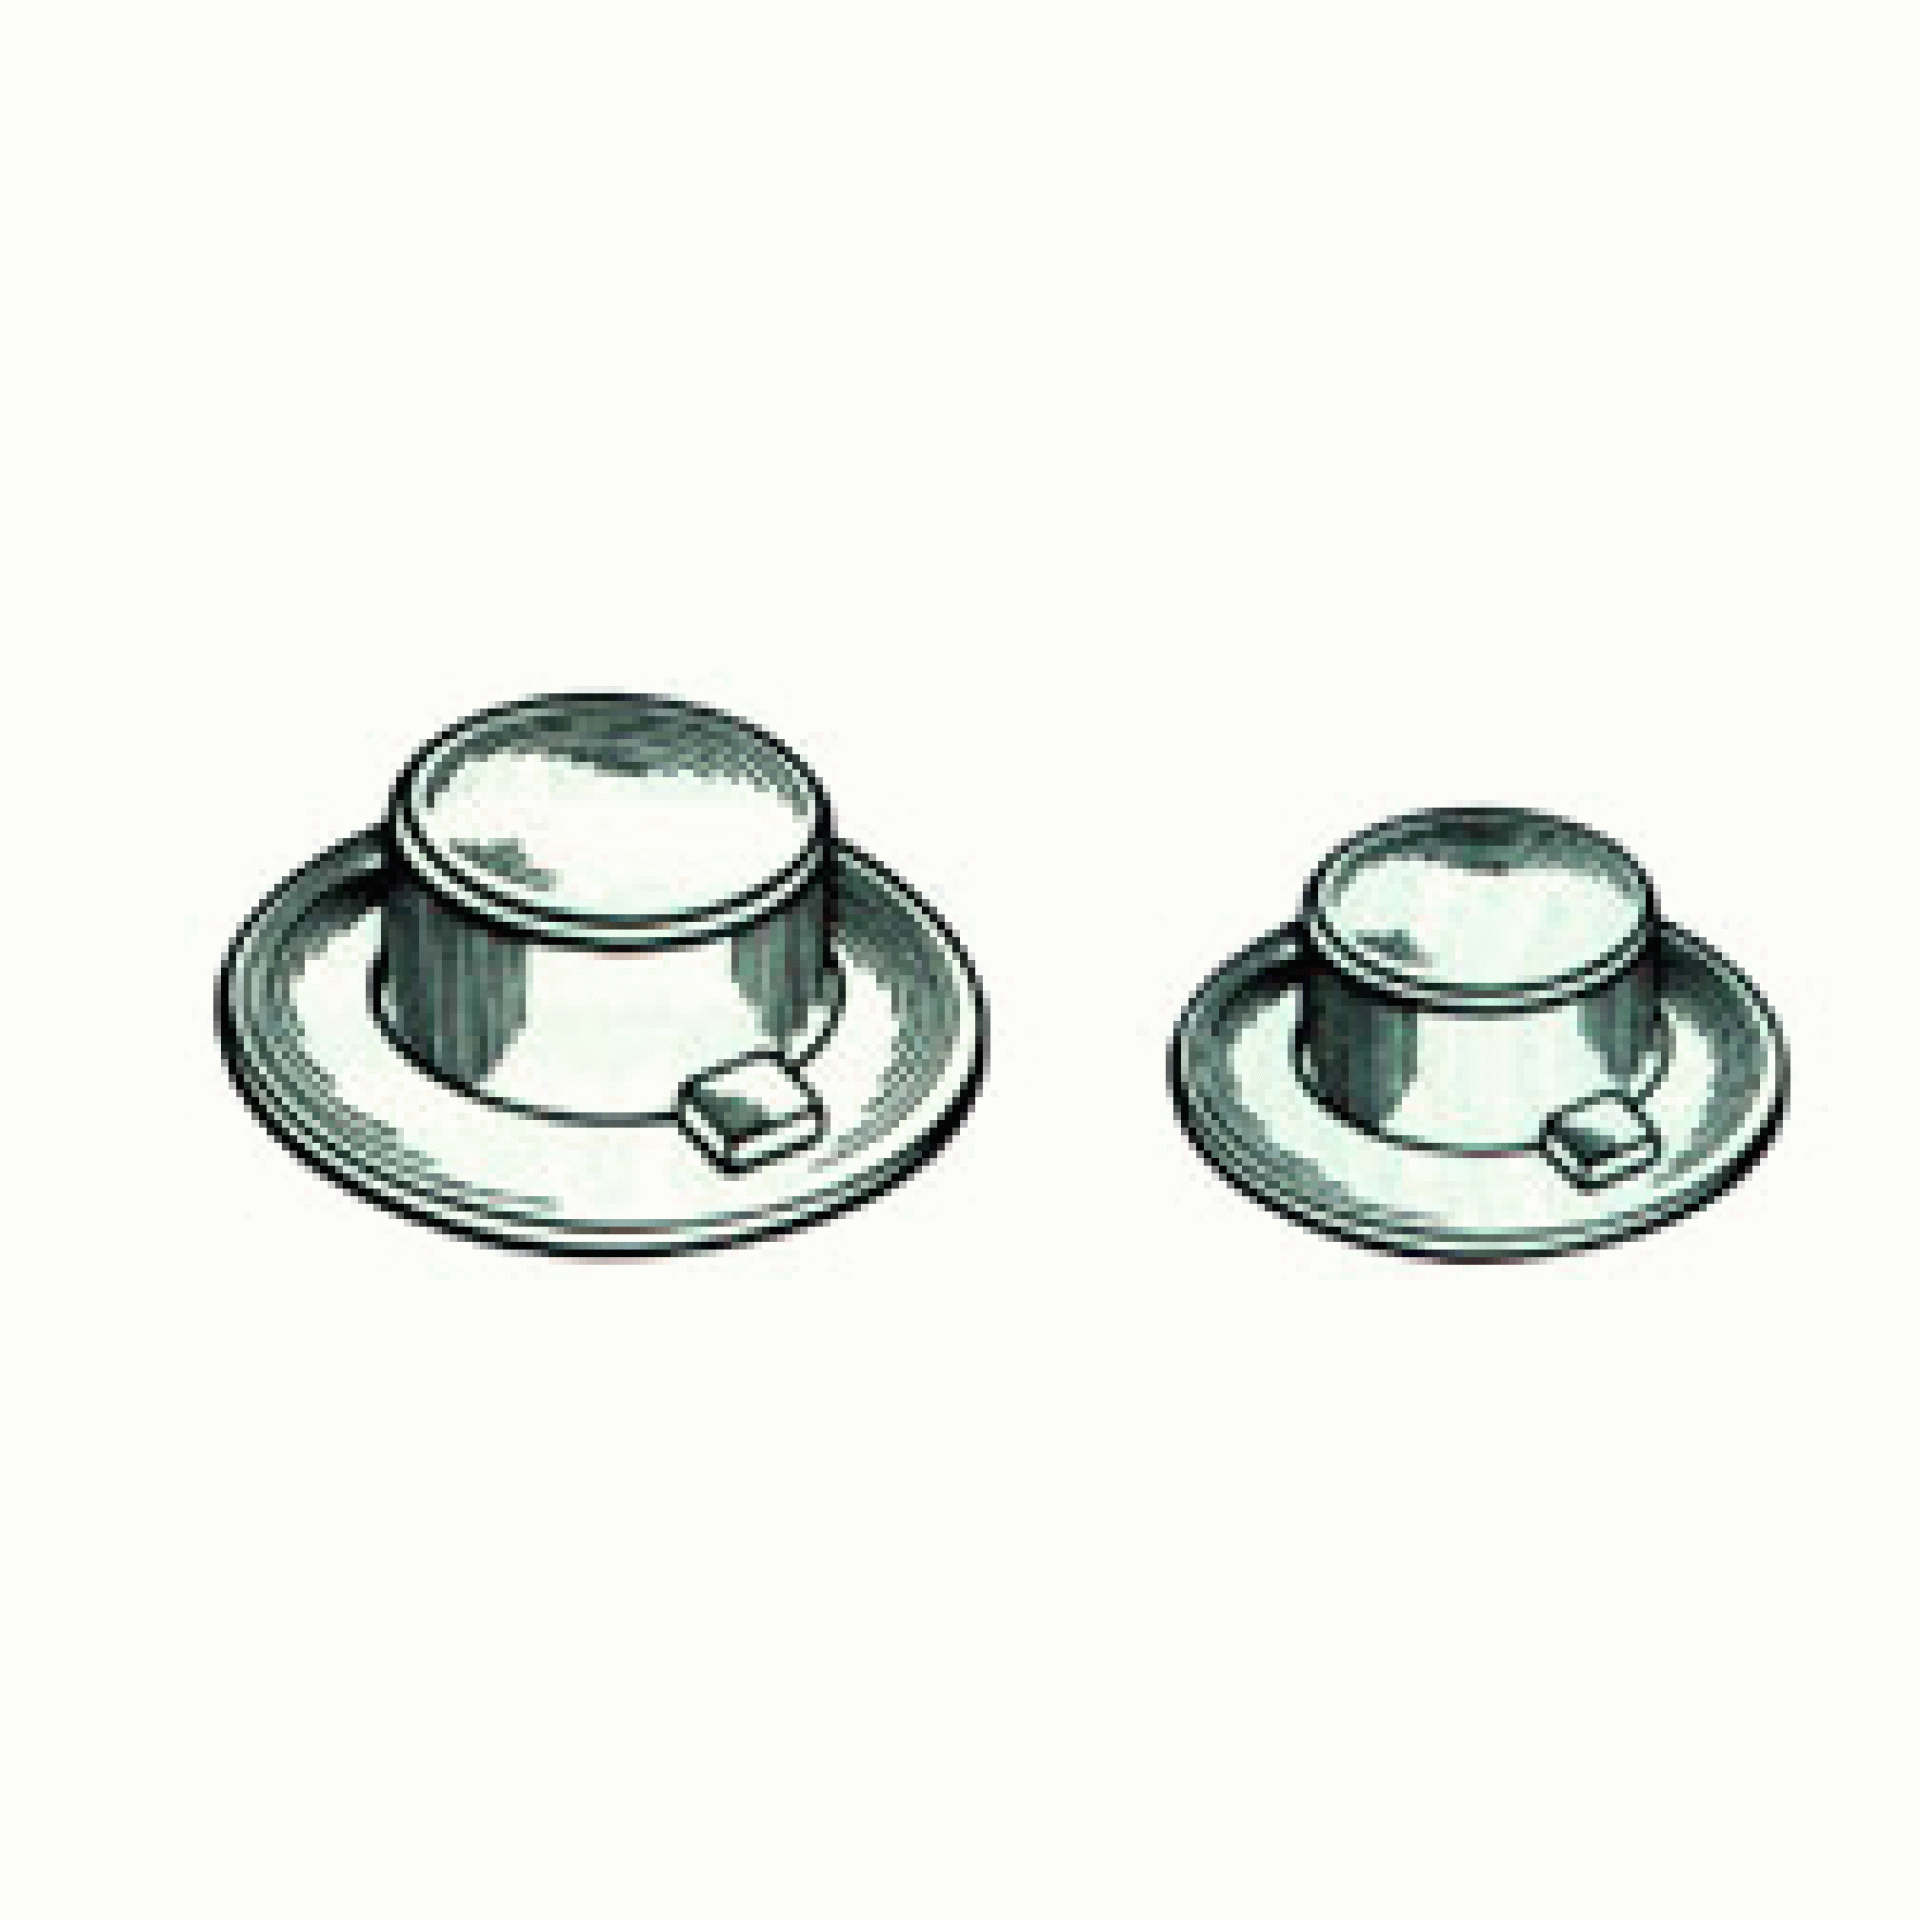 N TOW | 0479 | PAL NUT 5/8 INCH PK OF 4